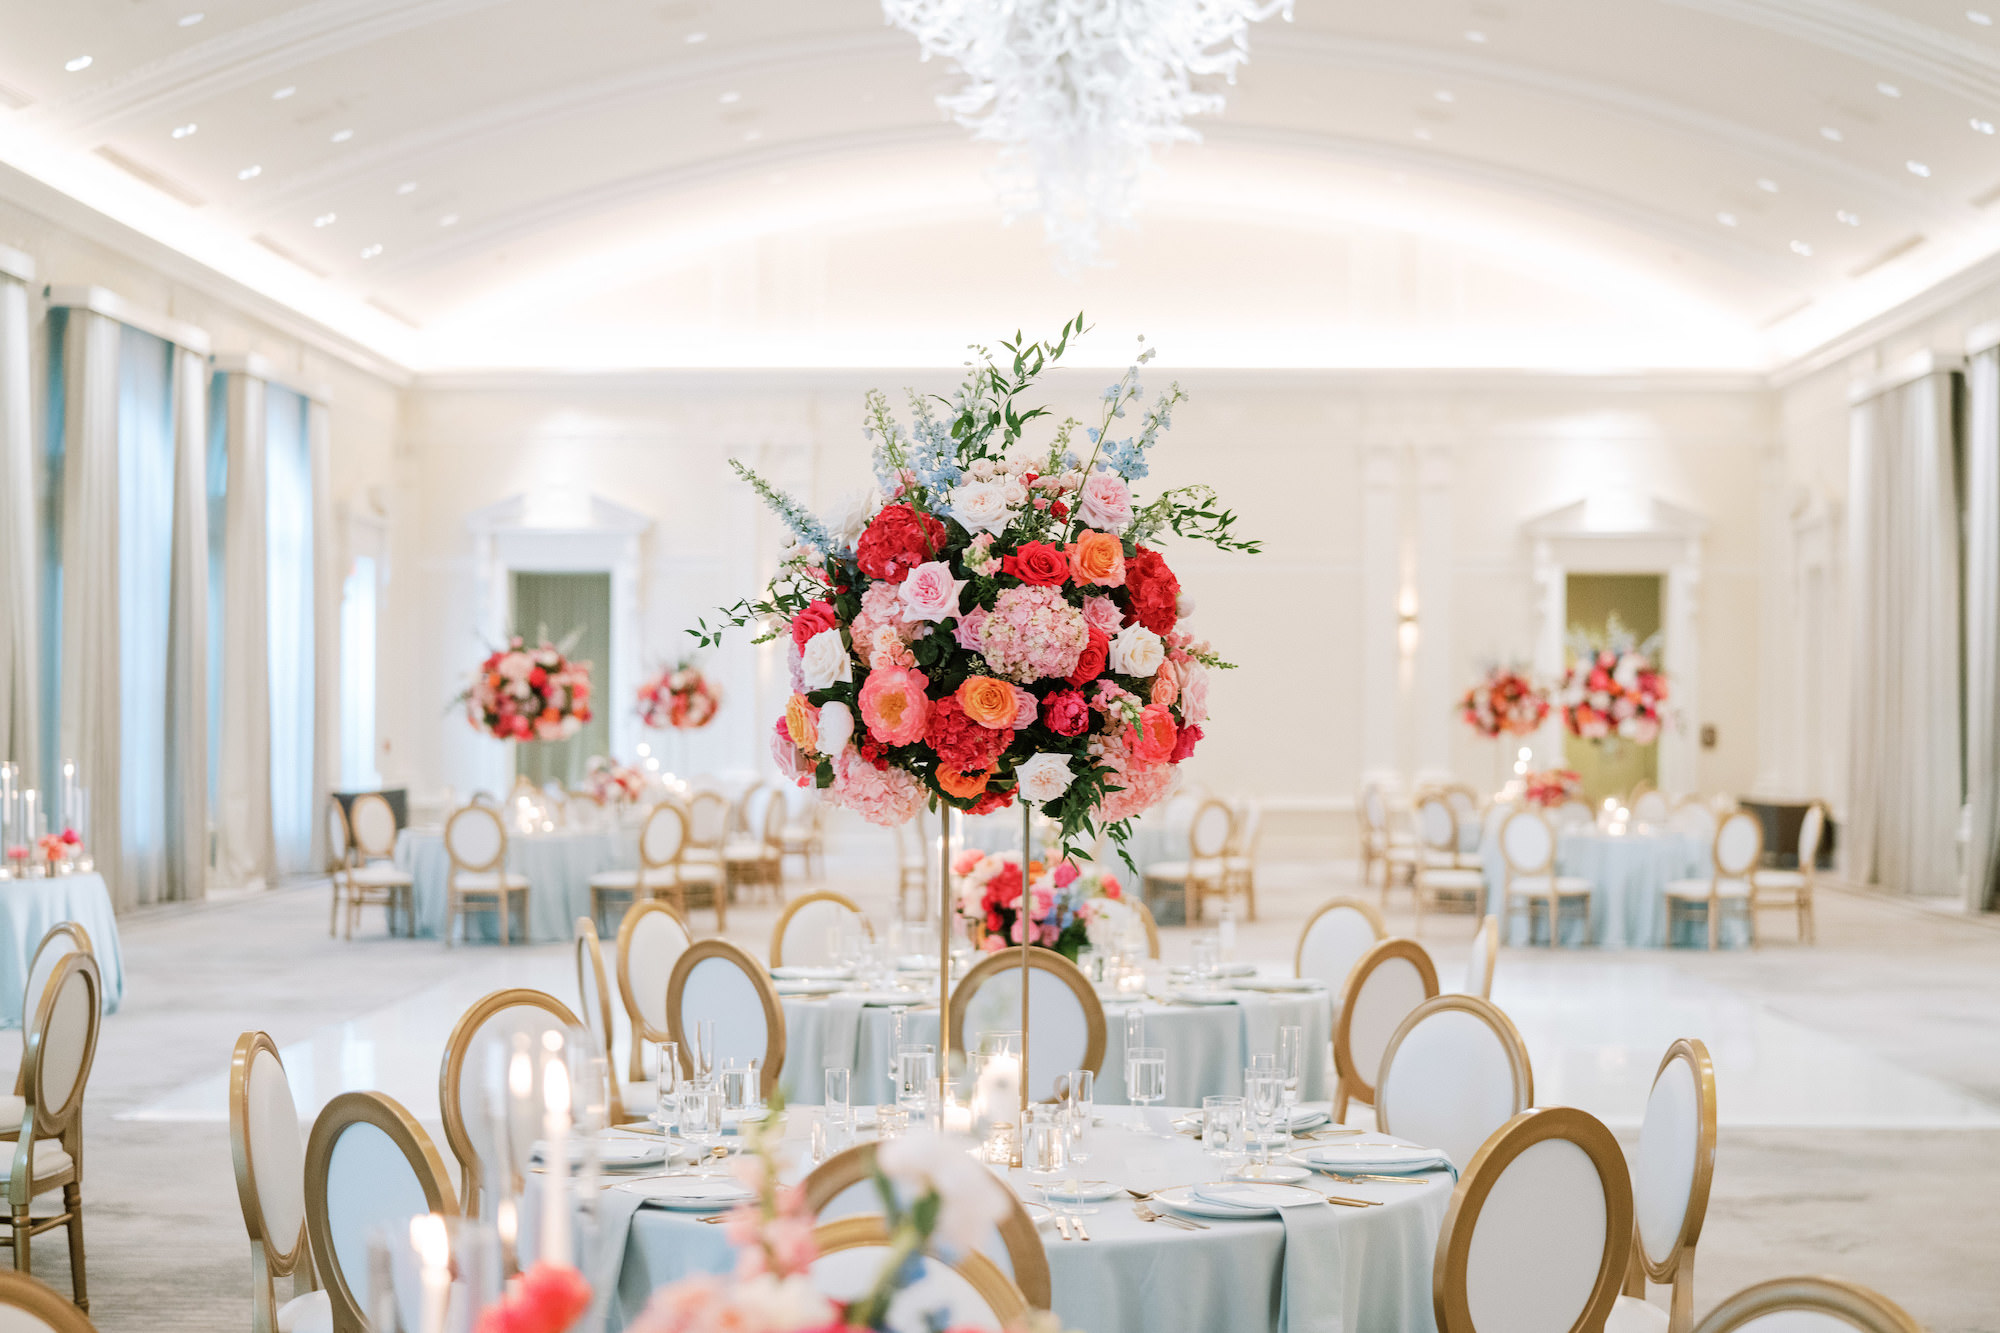 Luxurious Colorful Pink and Blue Ballroom Wedding Reception Tablescape Decor Inspiration